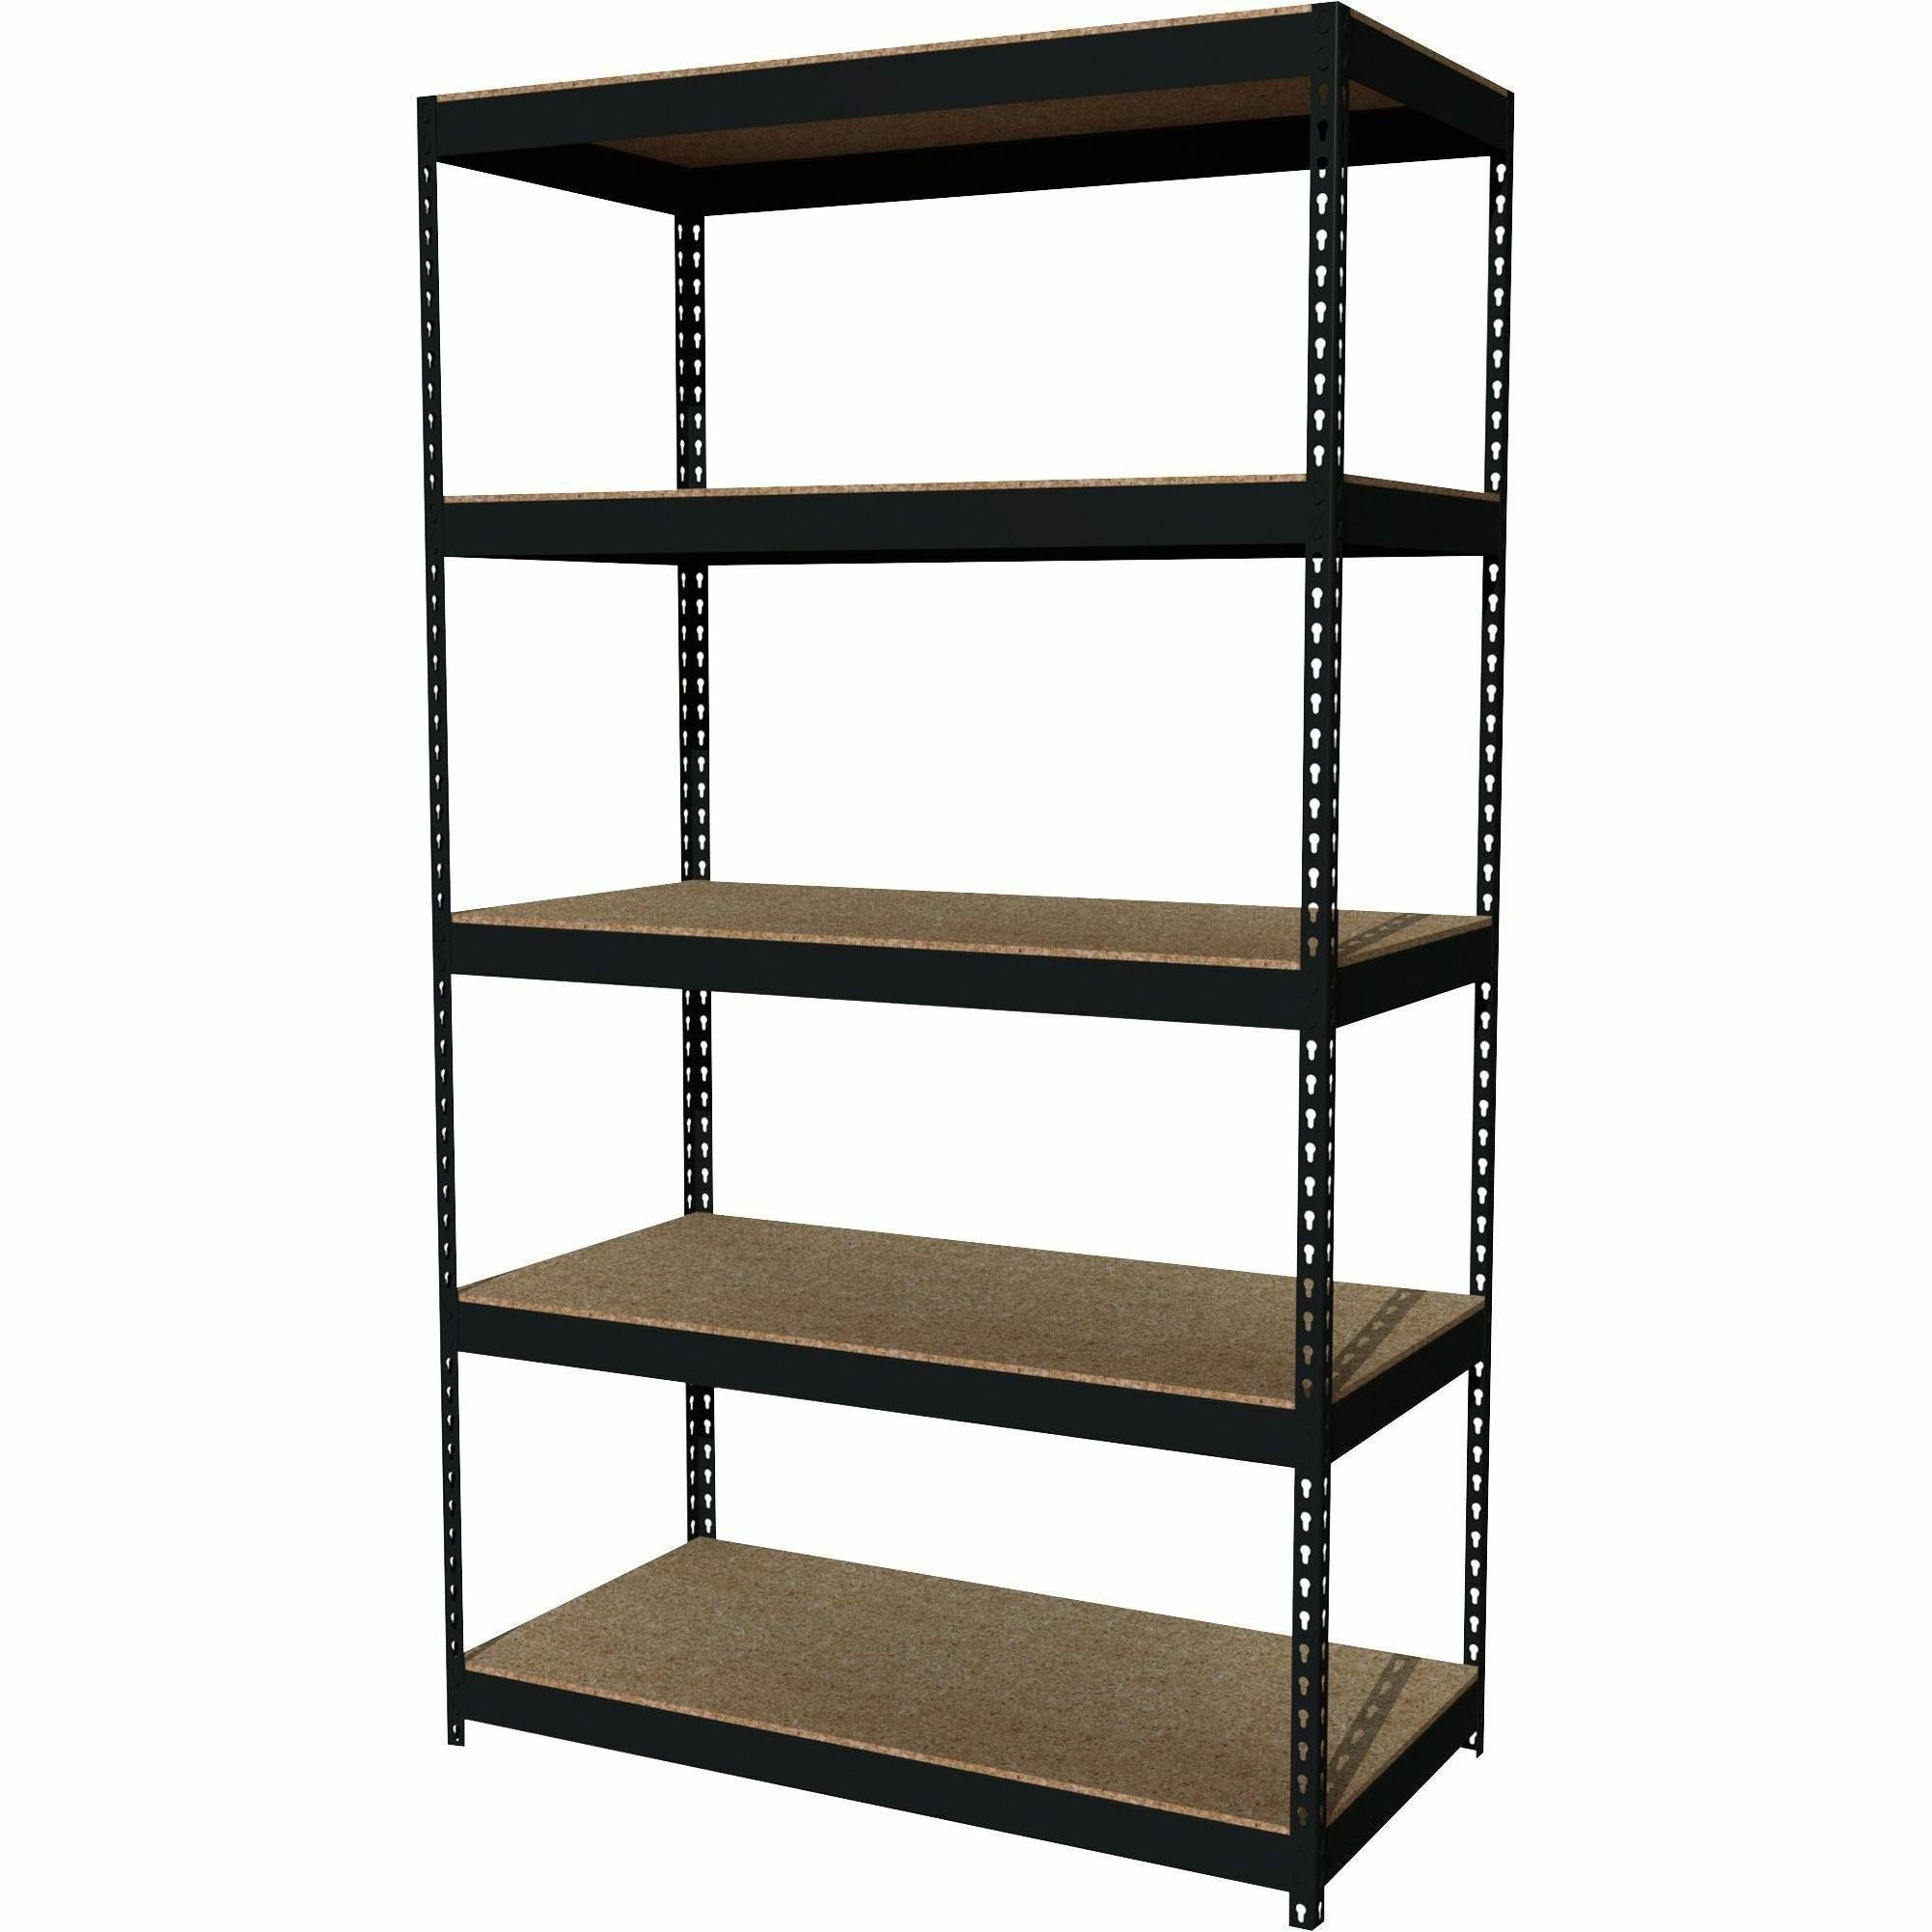 Lorell Fortress Riveted Shelving - 5 Compartment(s) - 5 Shelf(ves) - 84" Height x 48" Width x 24" Depth - Heavy Duty, Rust Resistant - 28% Recycled - Powder Coated - Black - Steel - 1 Each - 